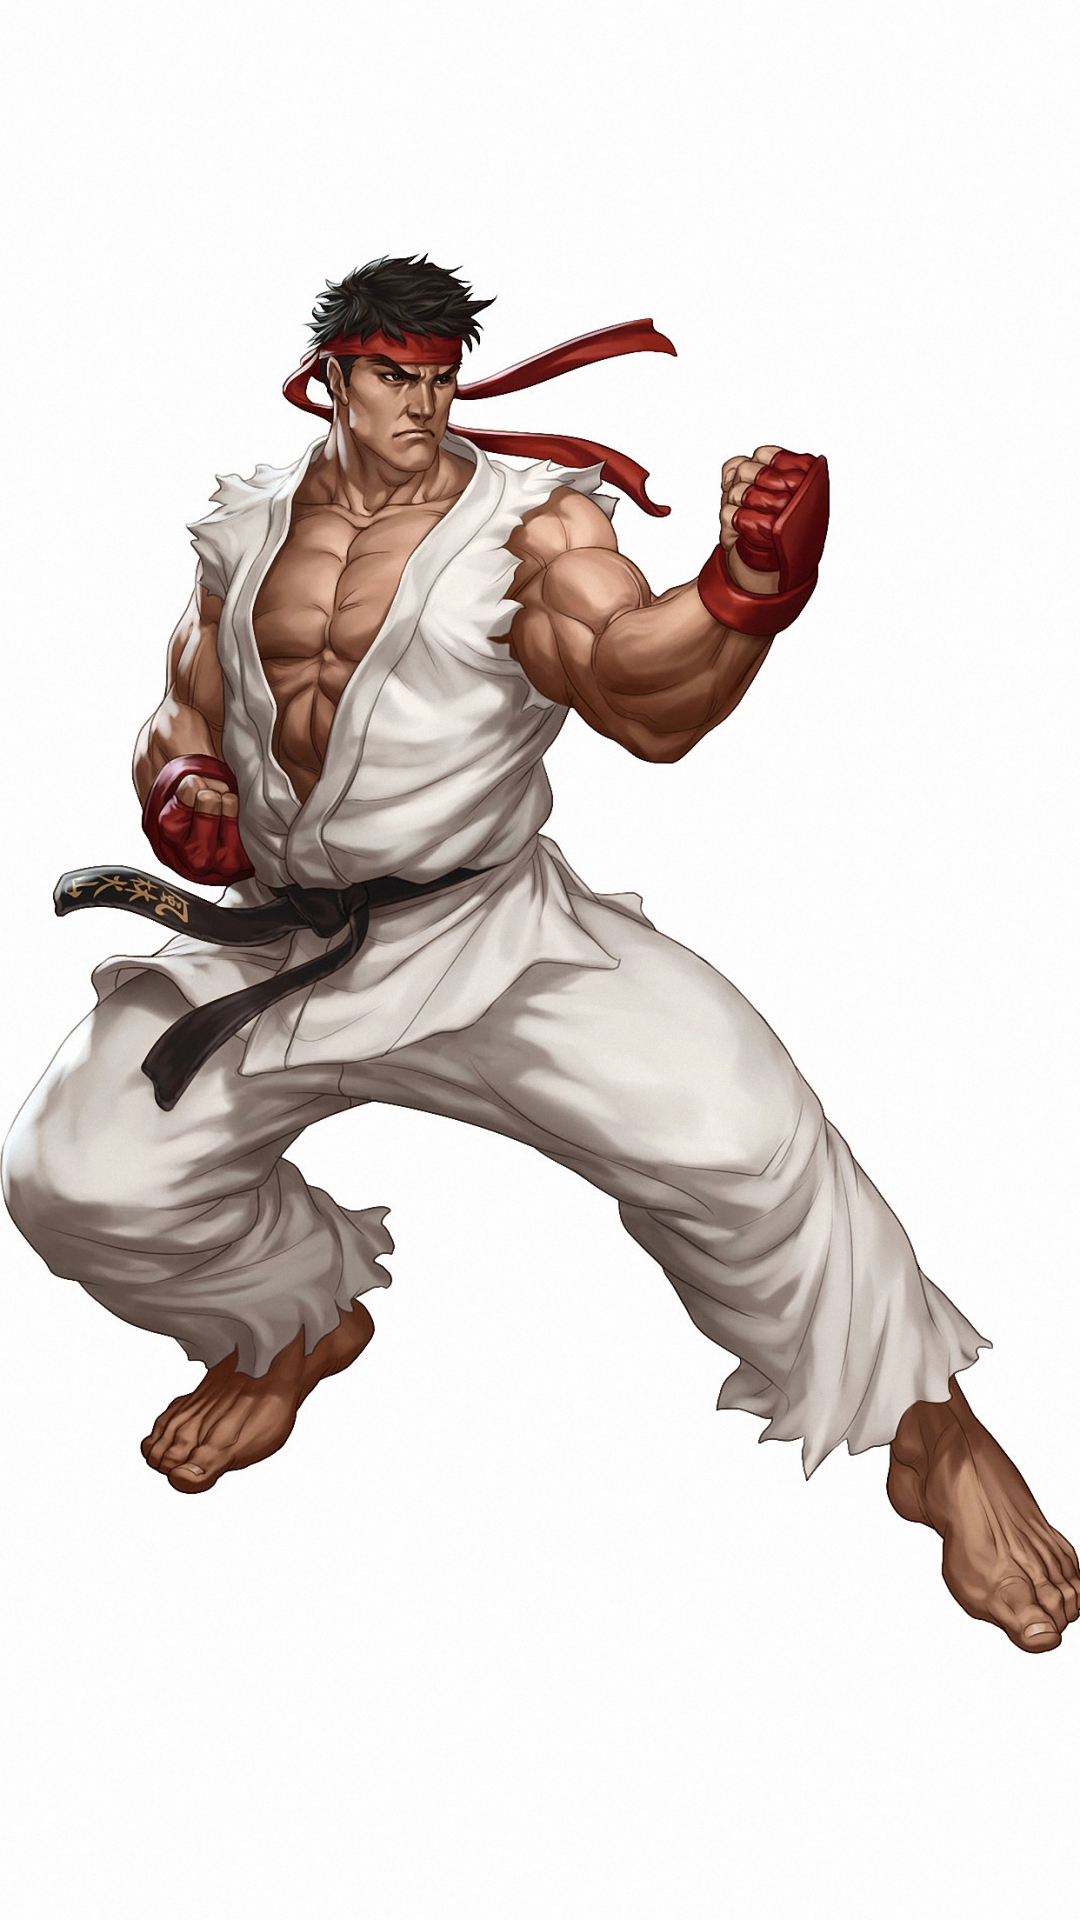 Ryu Street Fighter Game Iphone 6 Wallpapers Hd - Ryu From Street Fighter - HD Wallpaper 